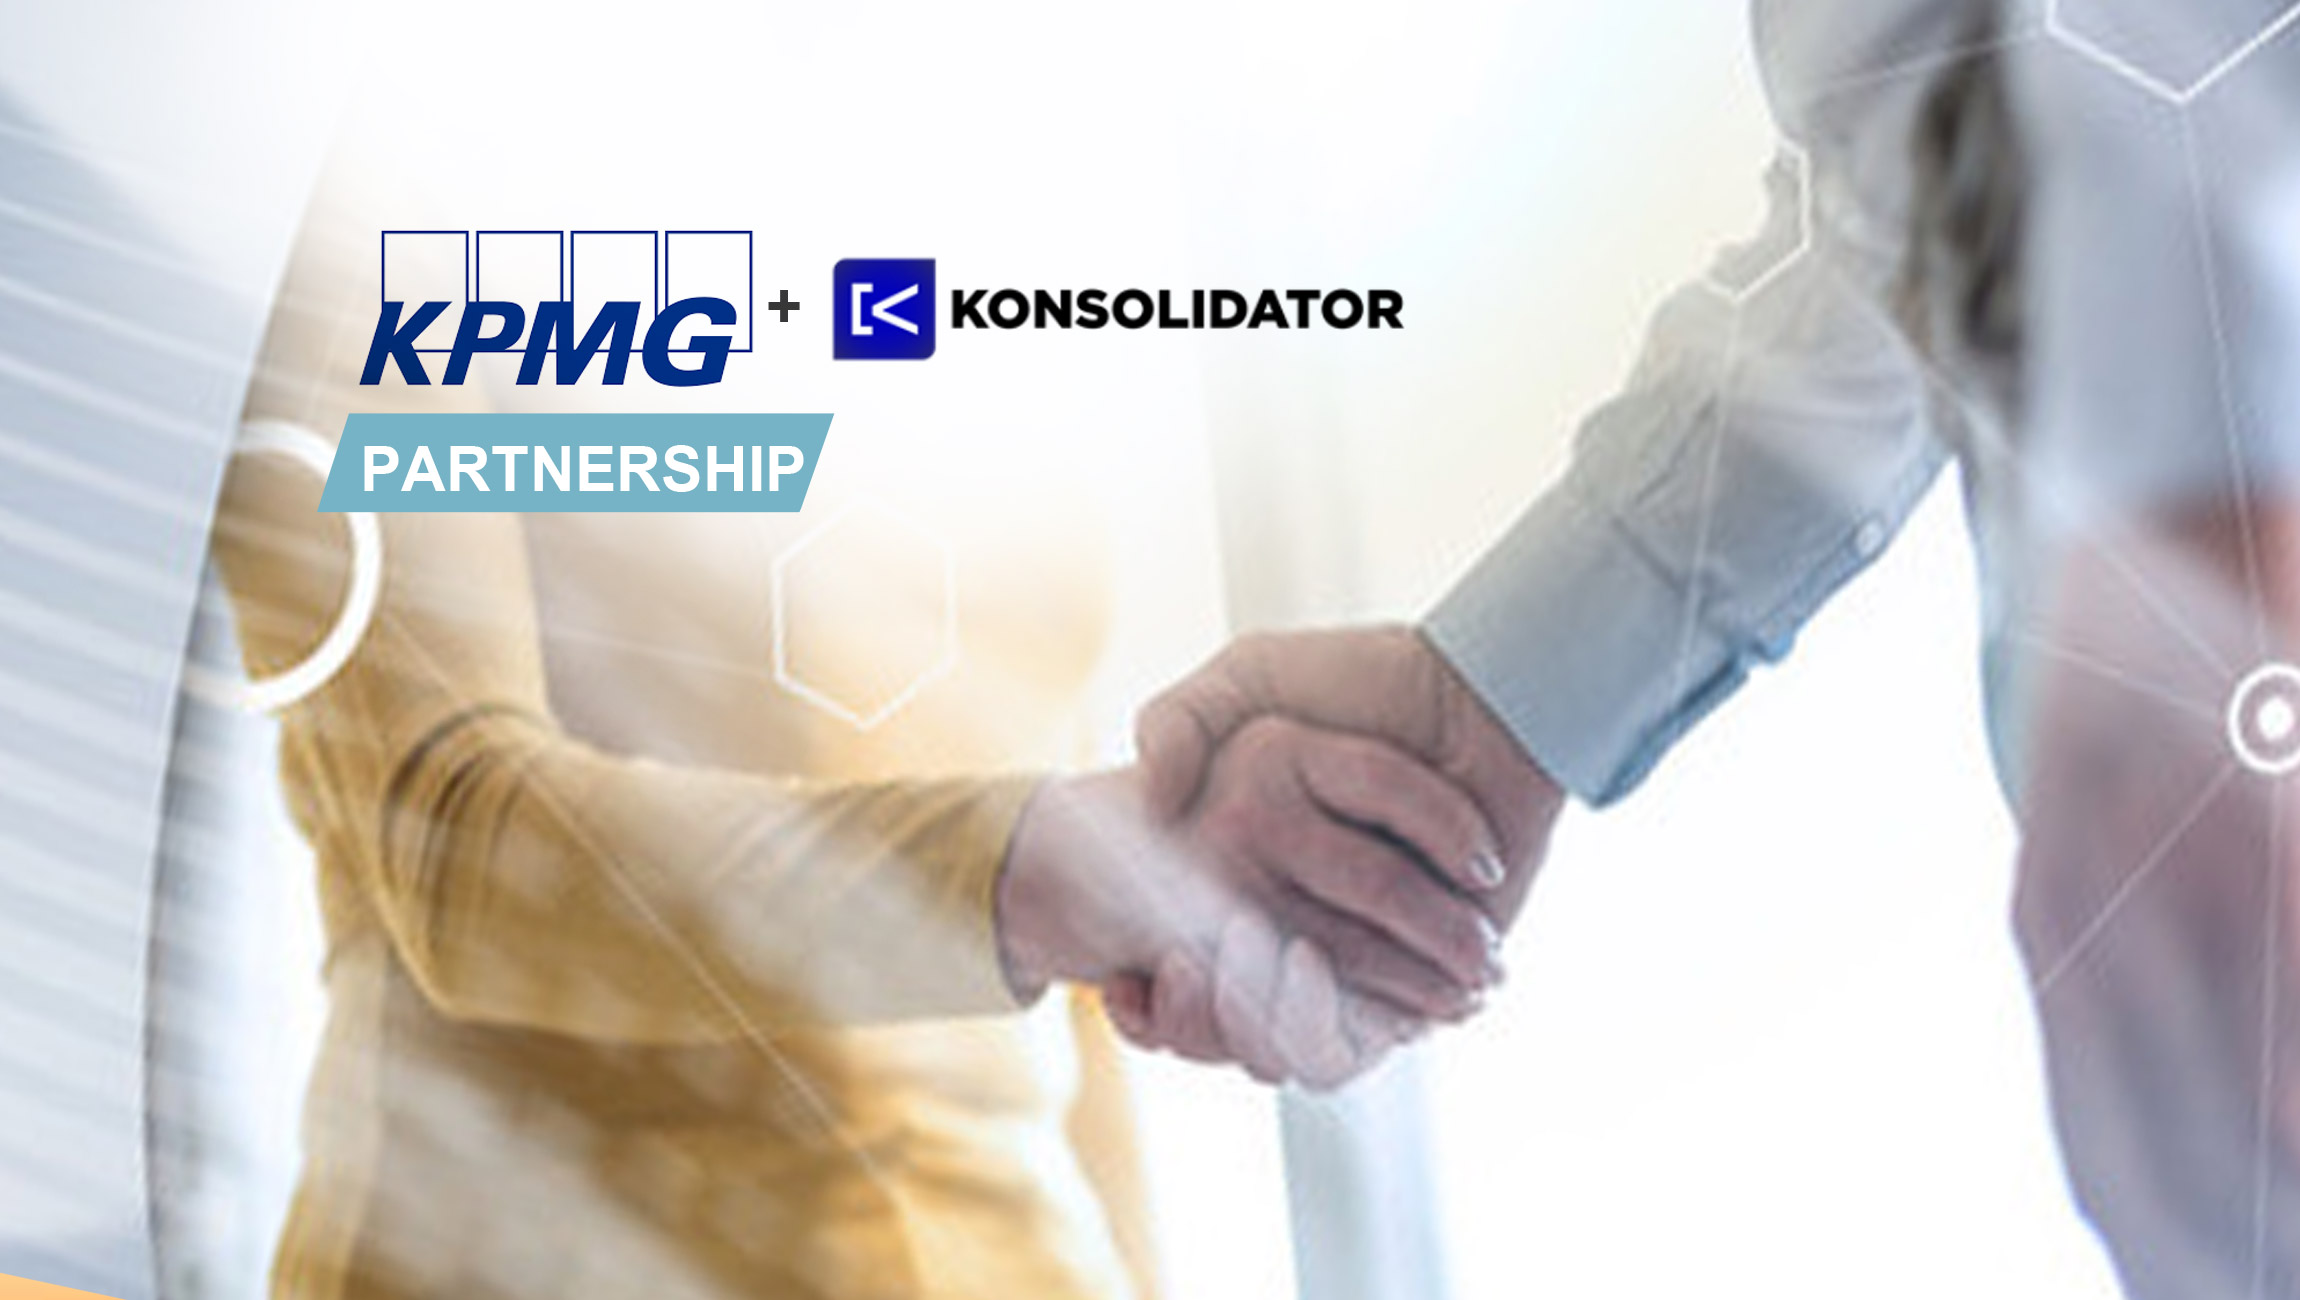 KPMG Switzerland extends their Konsolidator Partner Agreement to Include Consolidation as a Service (CaaS) and Sales